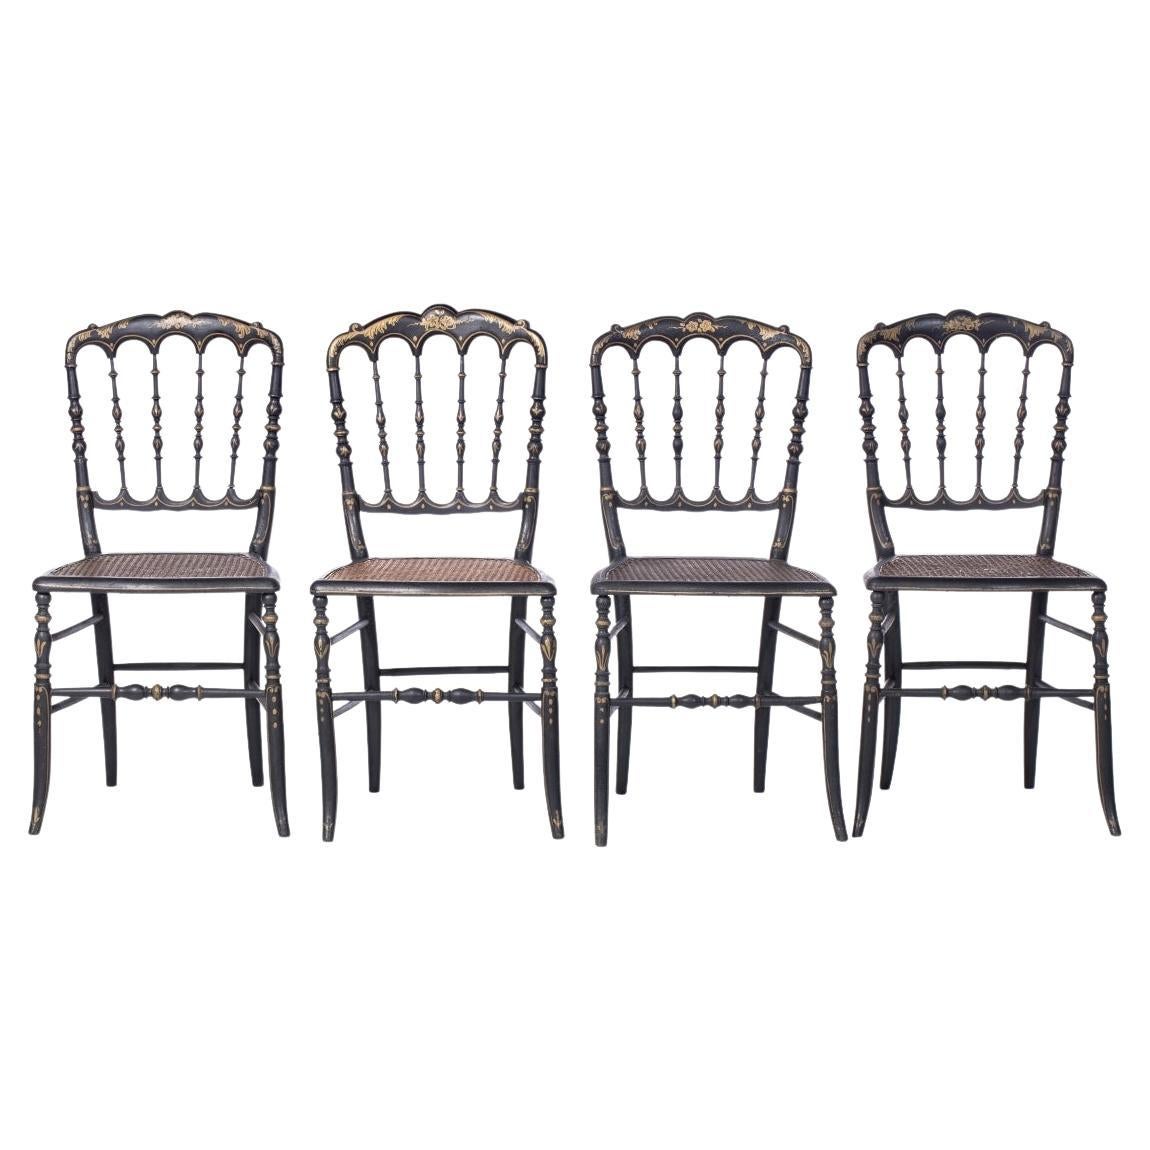 Set of Four Portuguese Chairs 19th Century